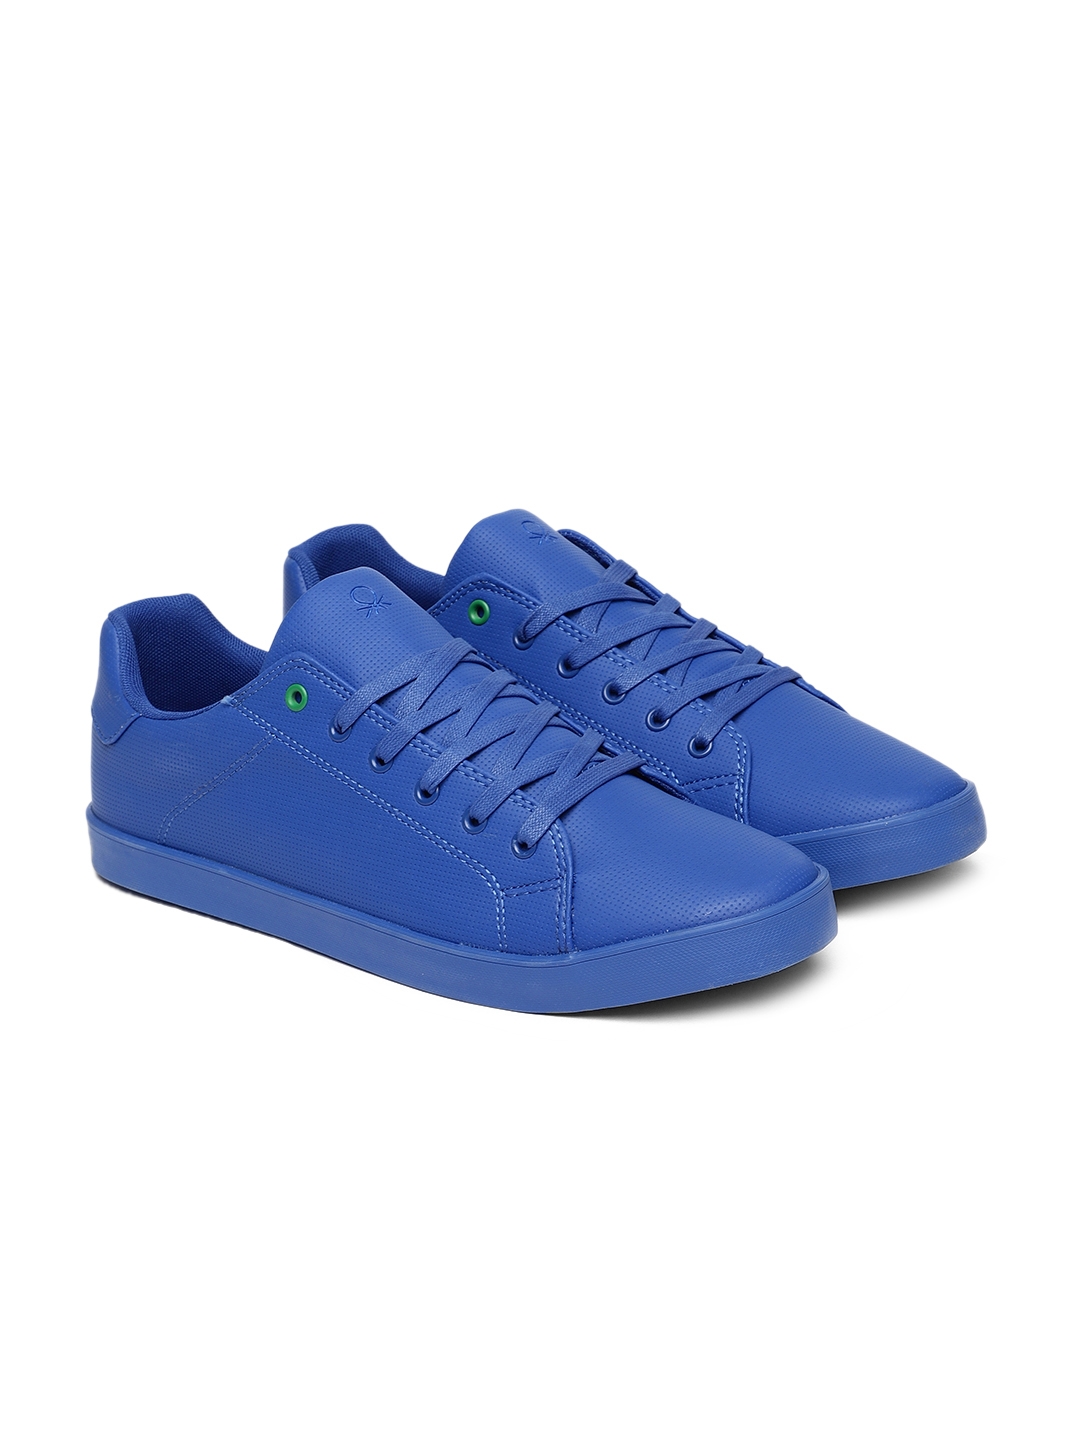 United Colors of Benetton Men Blue Sneakers